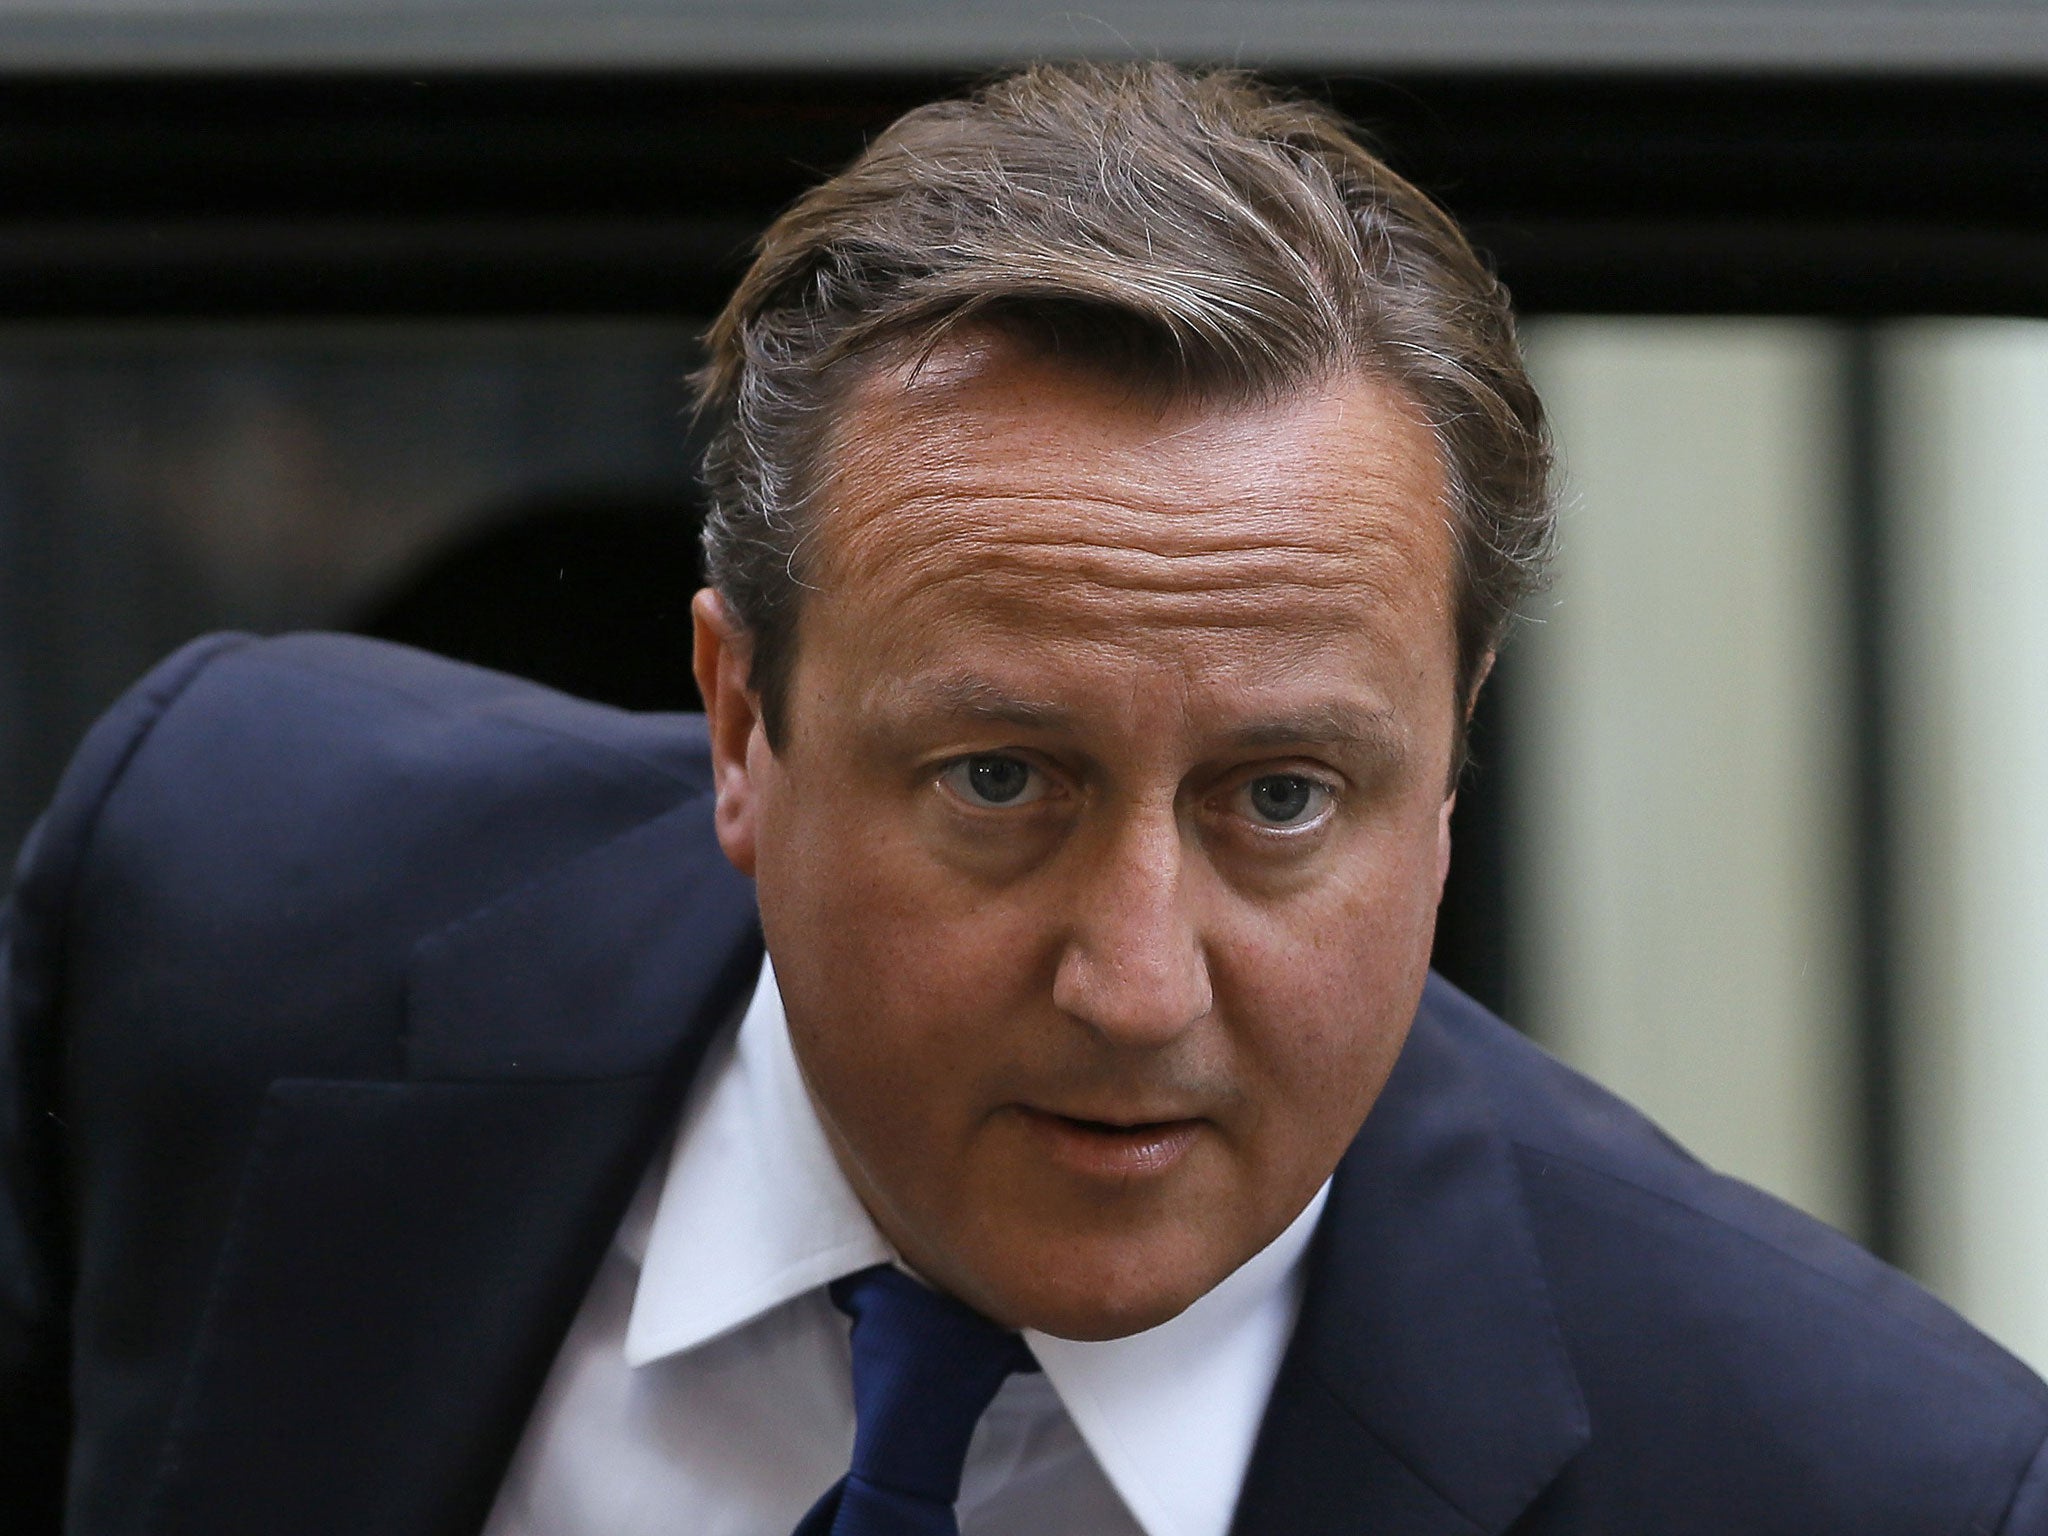 Cameron has said that a suspected chemical weapons attack in Syria was 'absolutely abhorrent' 